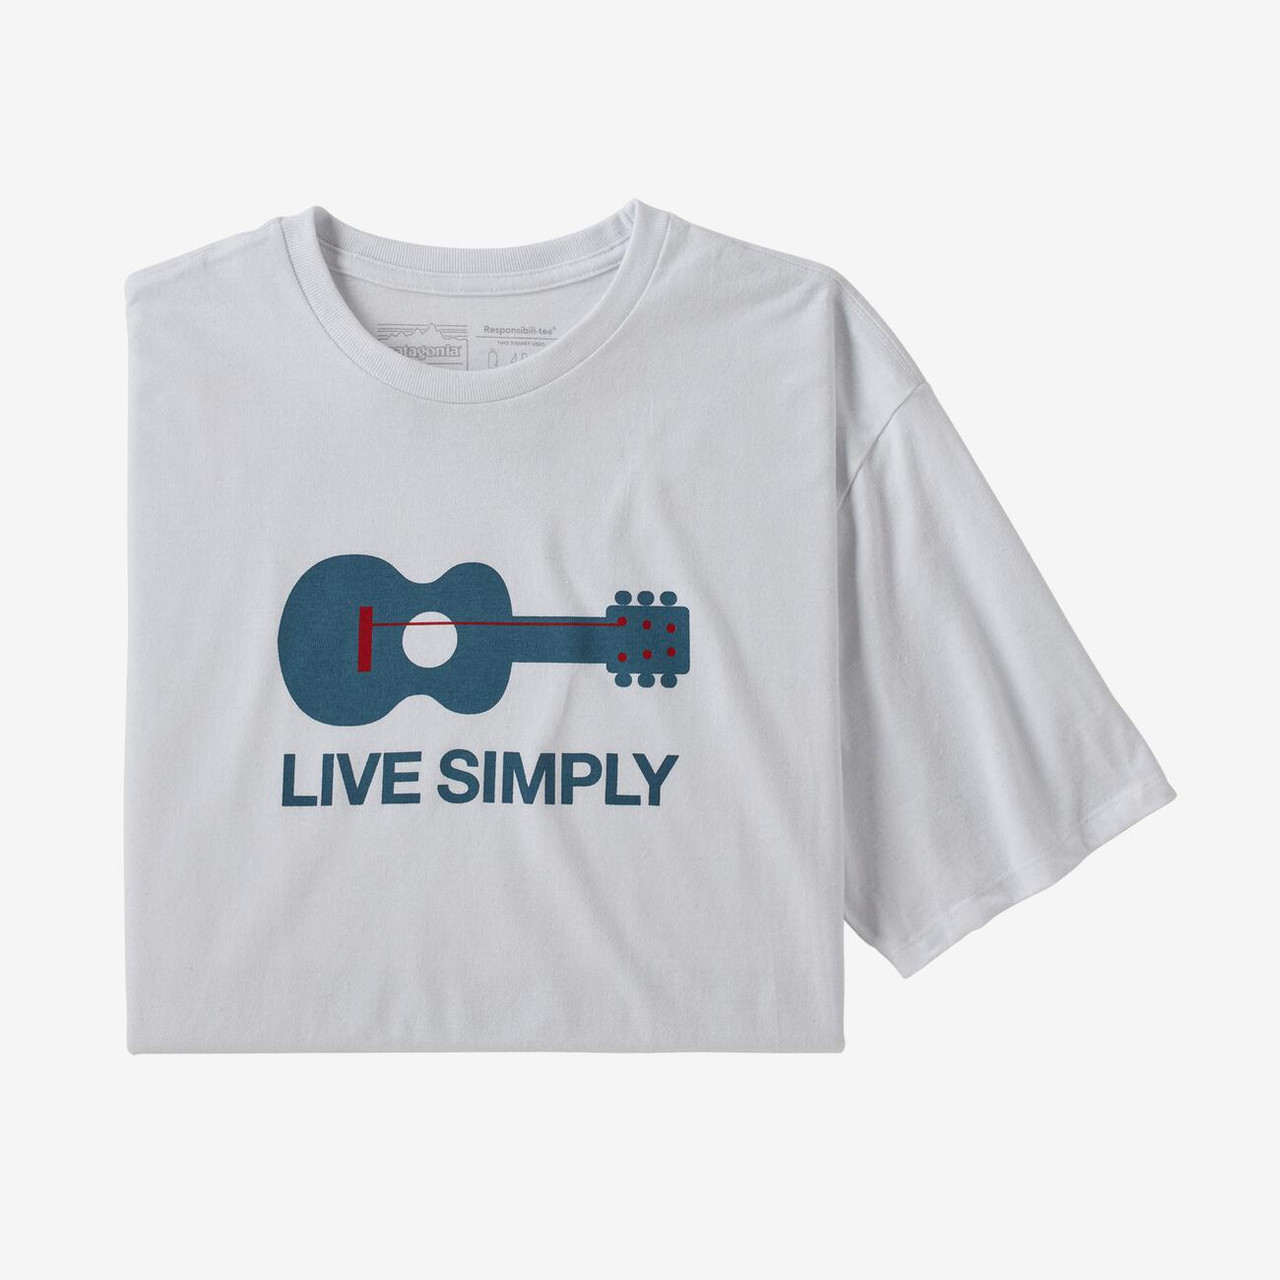 Live simply. Patagonia t Shirt Live simple.